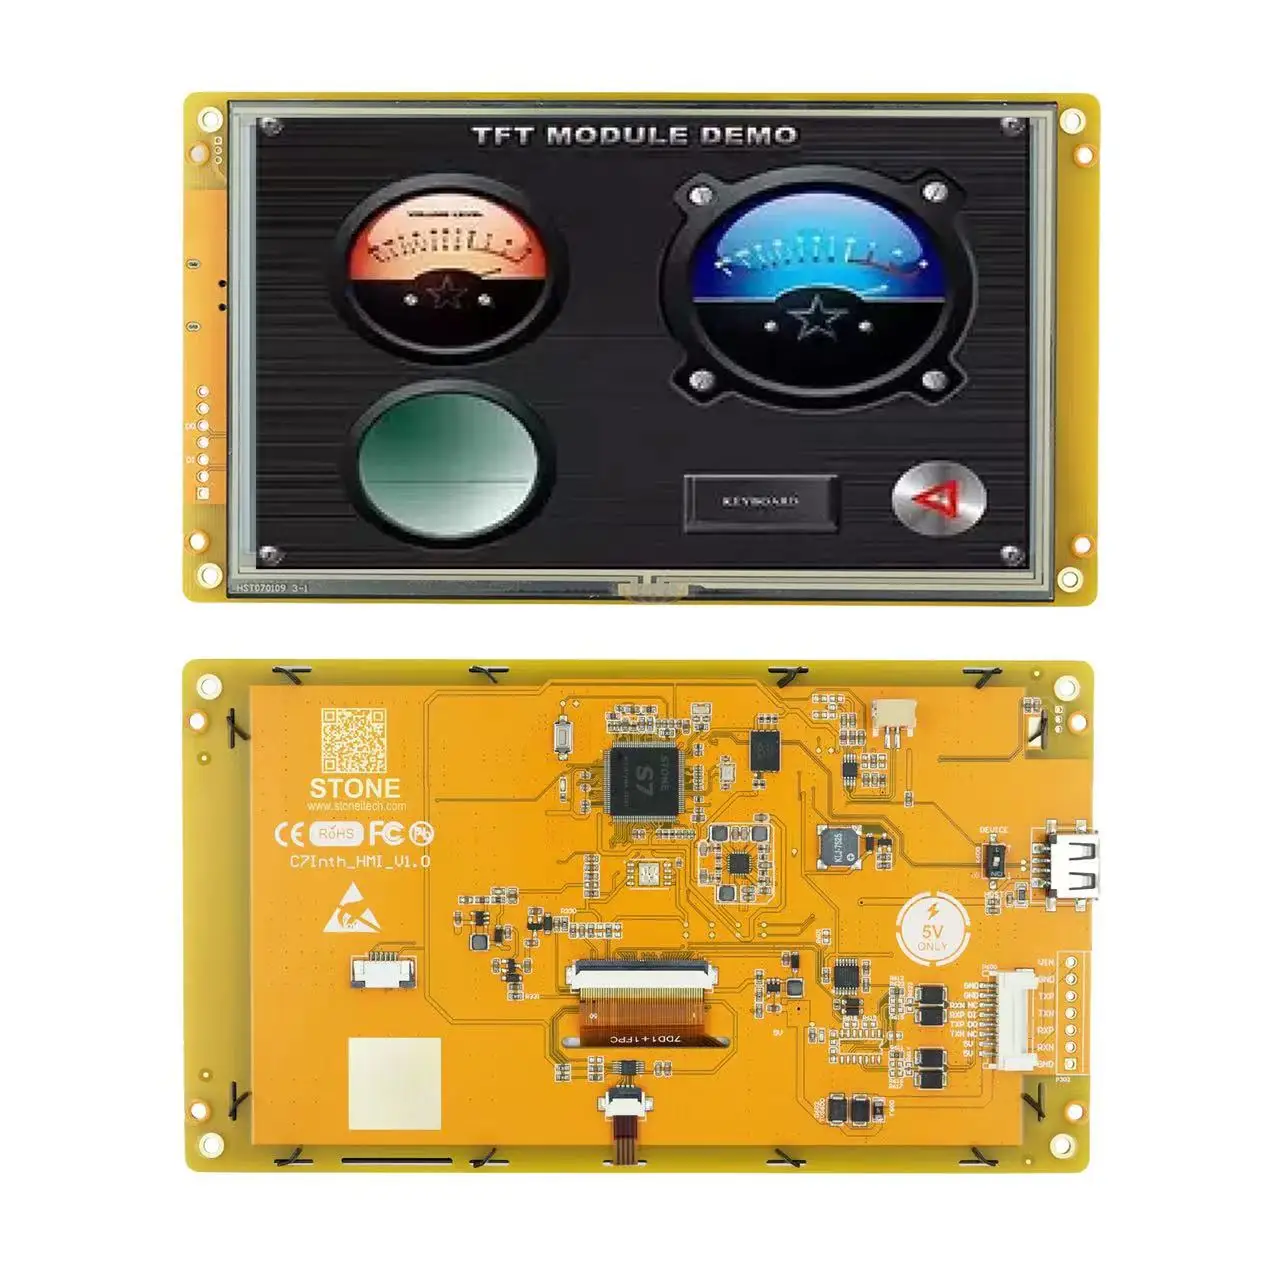 Stone 7 Inch Intelligence  HMI LCD TO Touch Screen Modules TFT Display for Industrial Use with the GUI Design Software